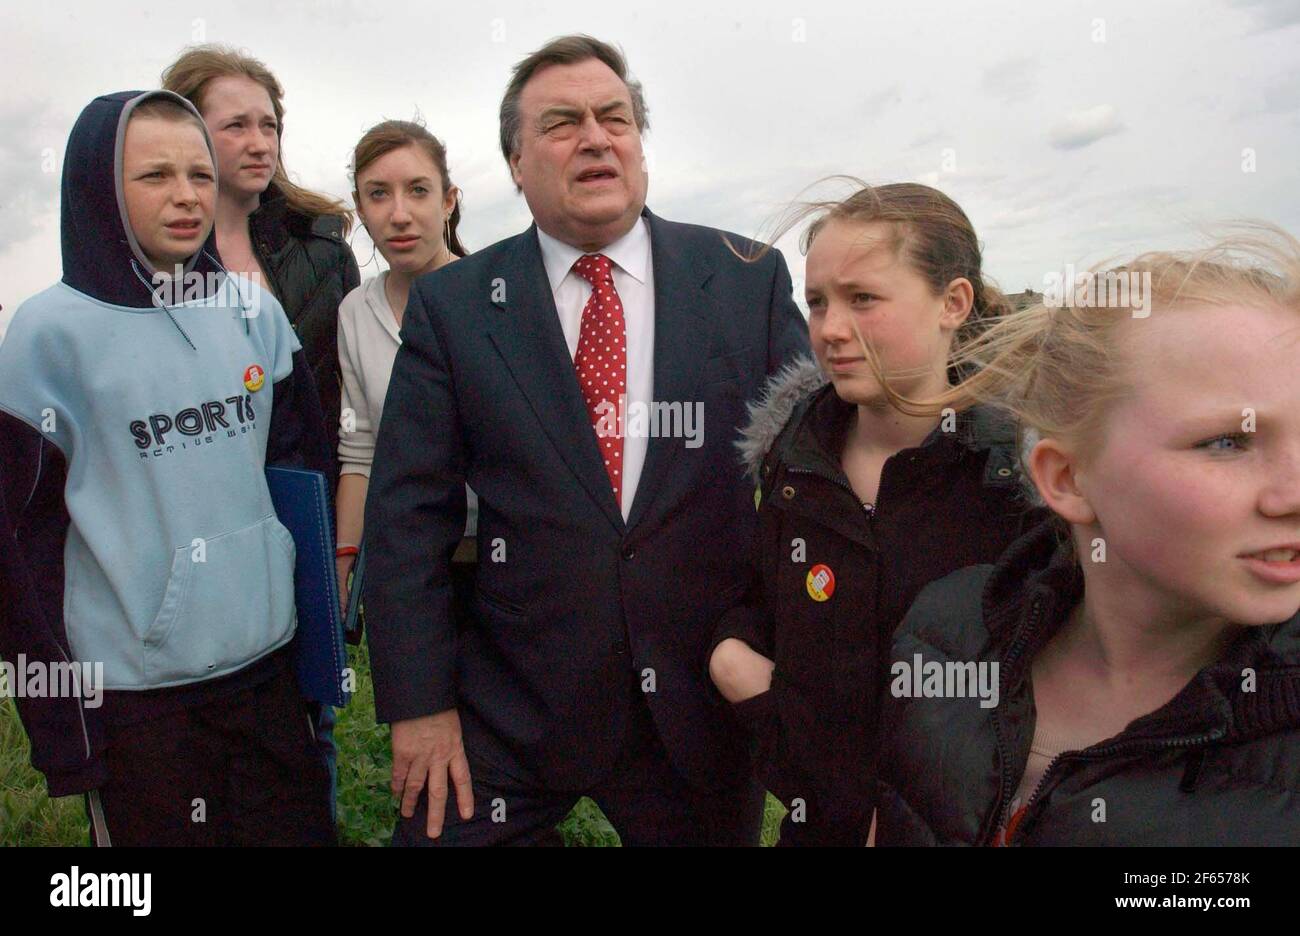 AS THE PRESCOTT EXPRESS ROLES THROUGH KENT,THE DEPT PRIME MINISTER HAS AN UNSCEDULED MEETING WITH SCHOOL KIDS FROM THE VINERIES ESTATE IN GILLINGHAM.5/4/05 PILSTON Stock Photo